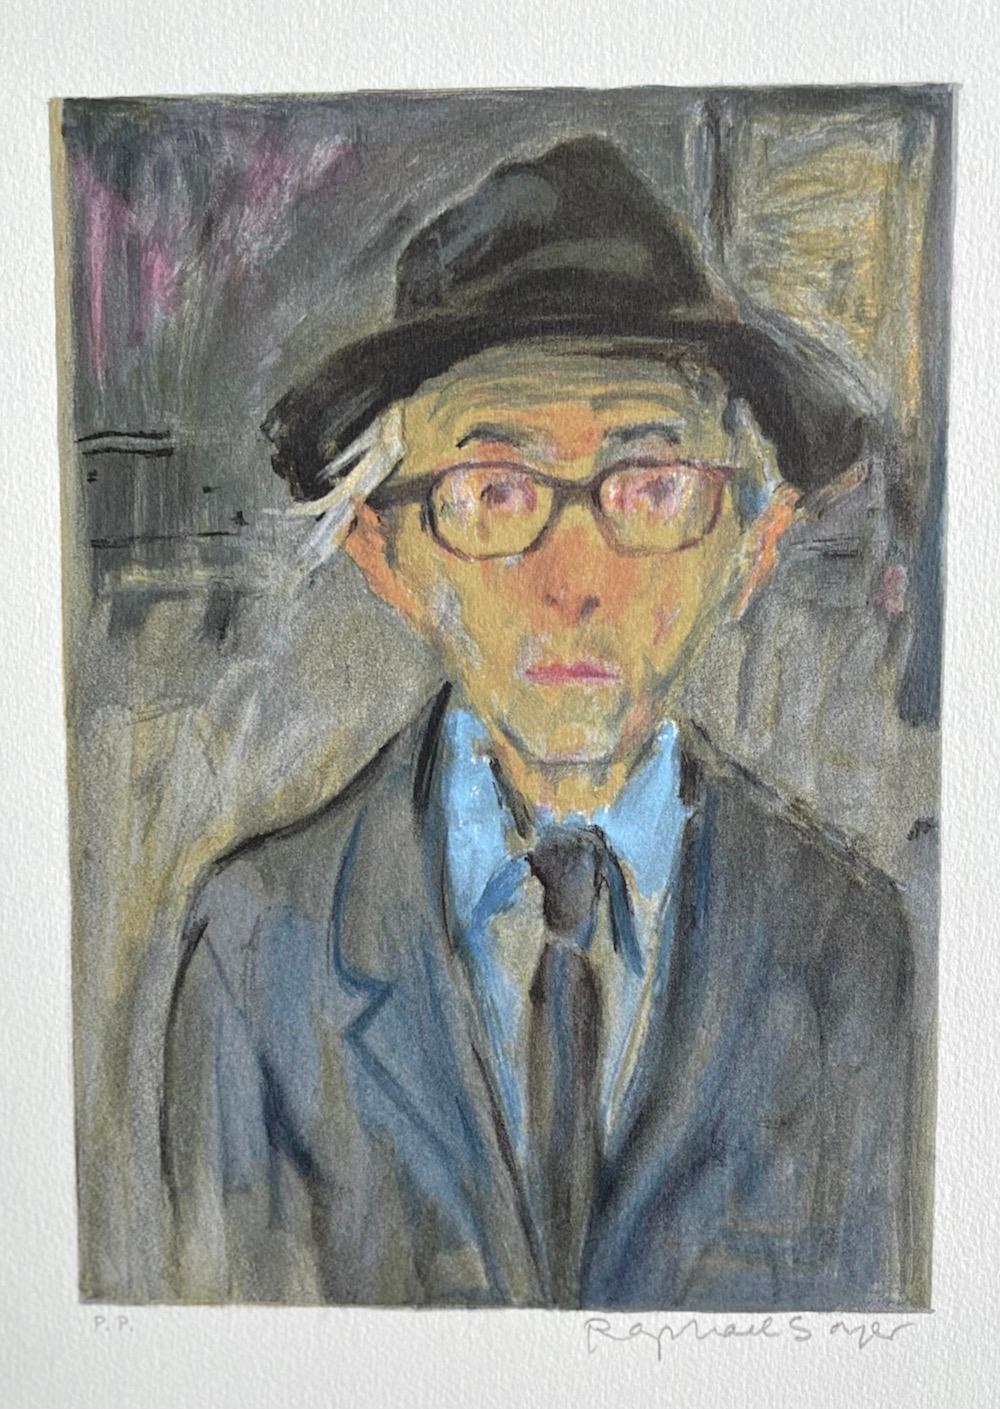 Raphael Soyer Self-Portrait, Signed Lithograph, Man in Hat w Glasses, Realism